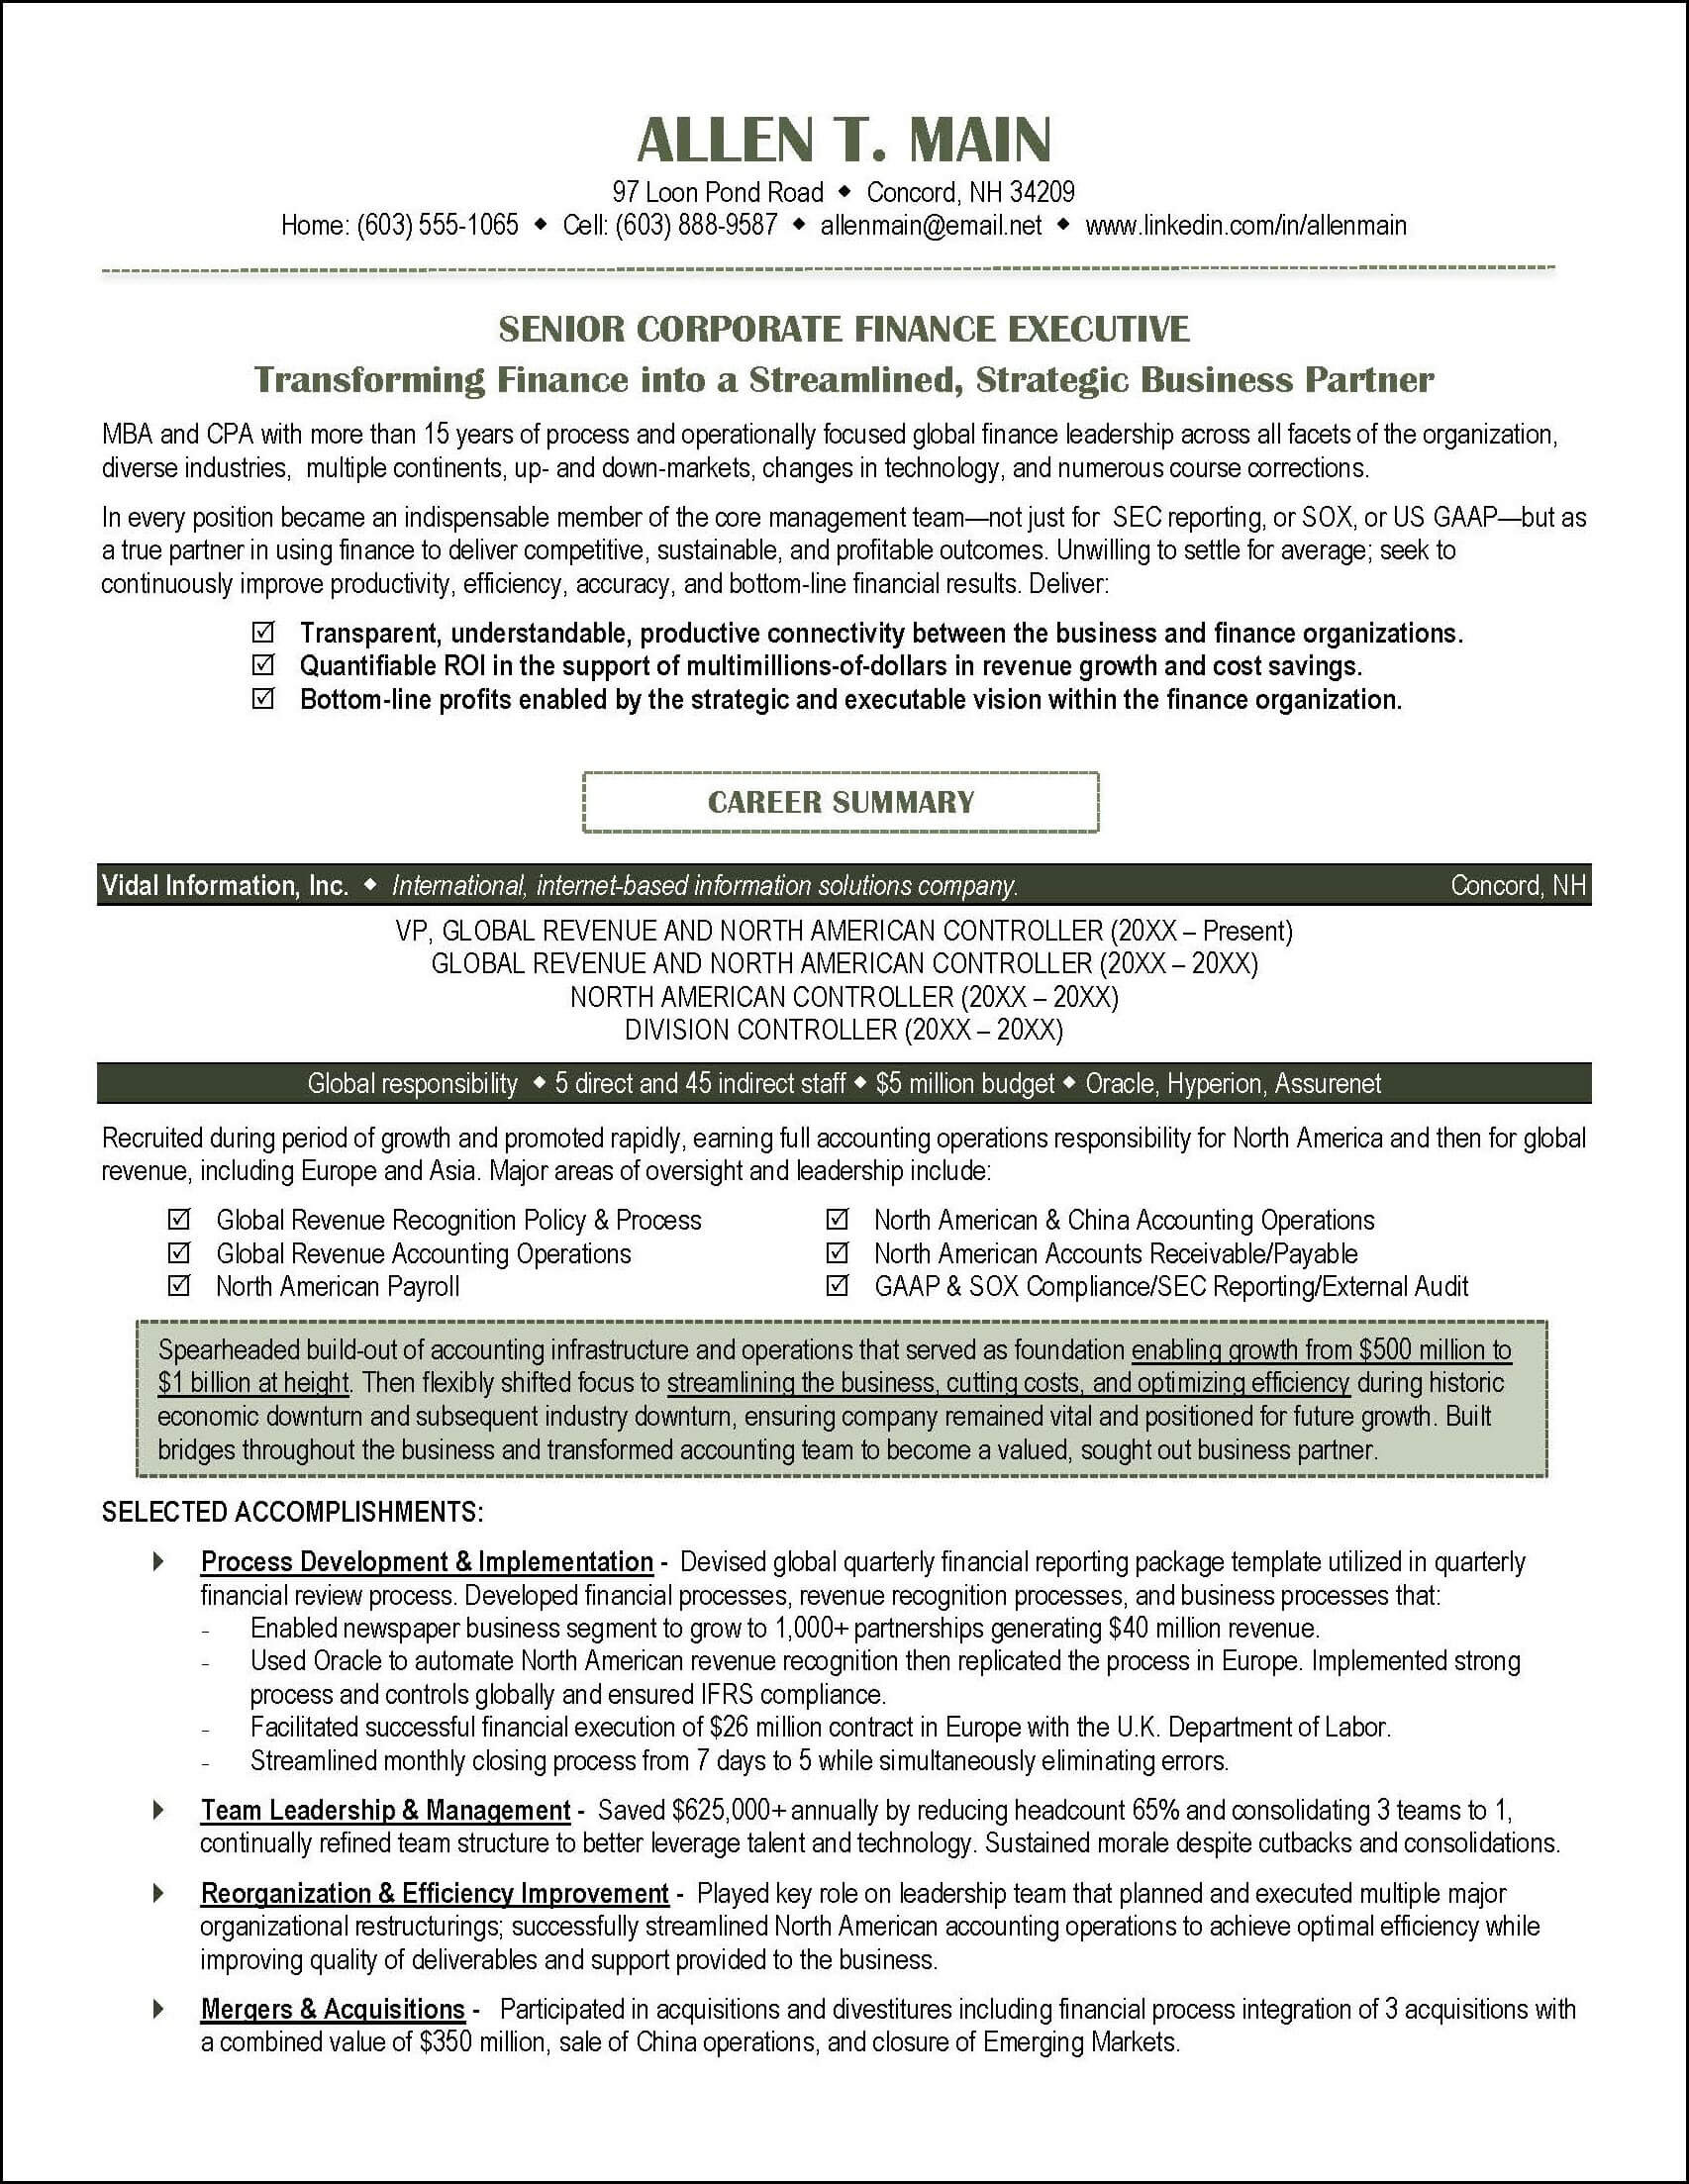 Resume Samples Uiuc Dual Degrees Finance and Accounting Accounting Resume Example – Distinctive Career Services